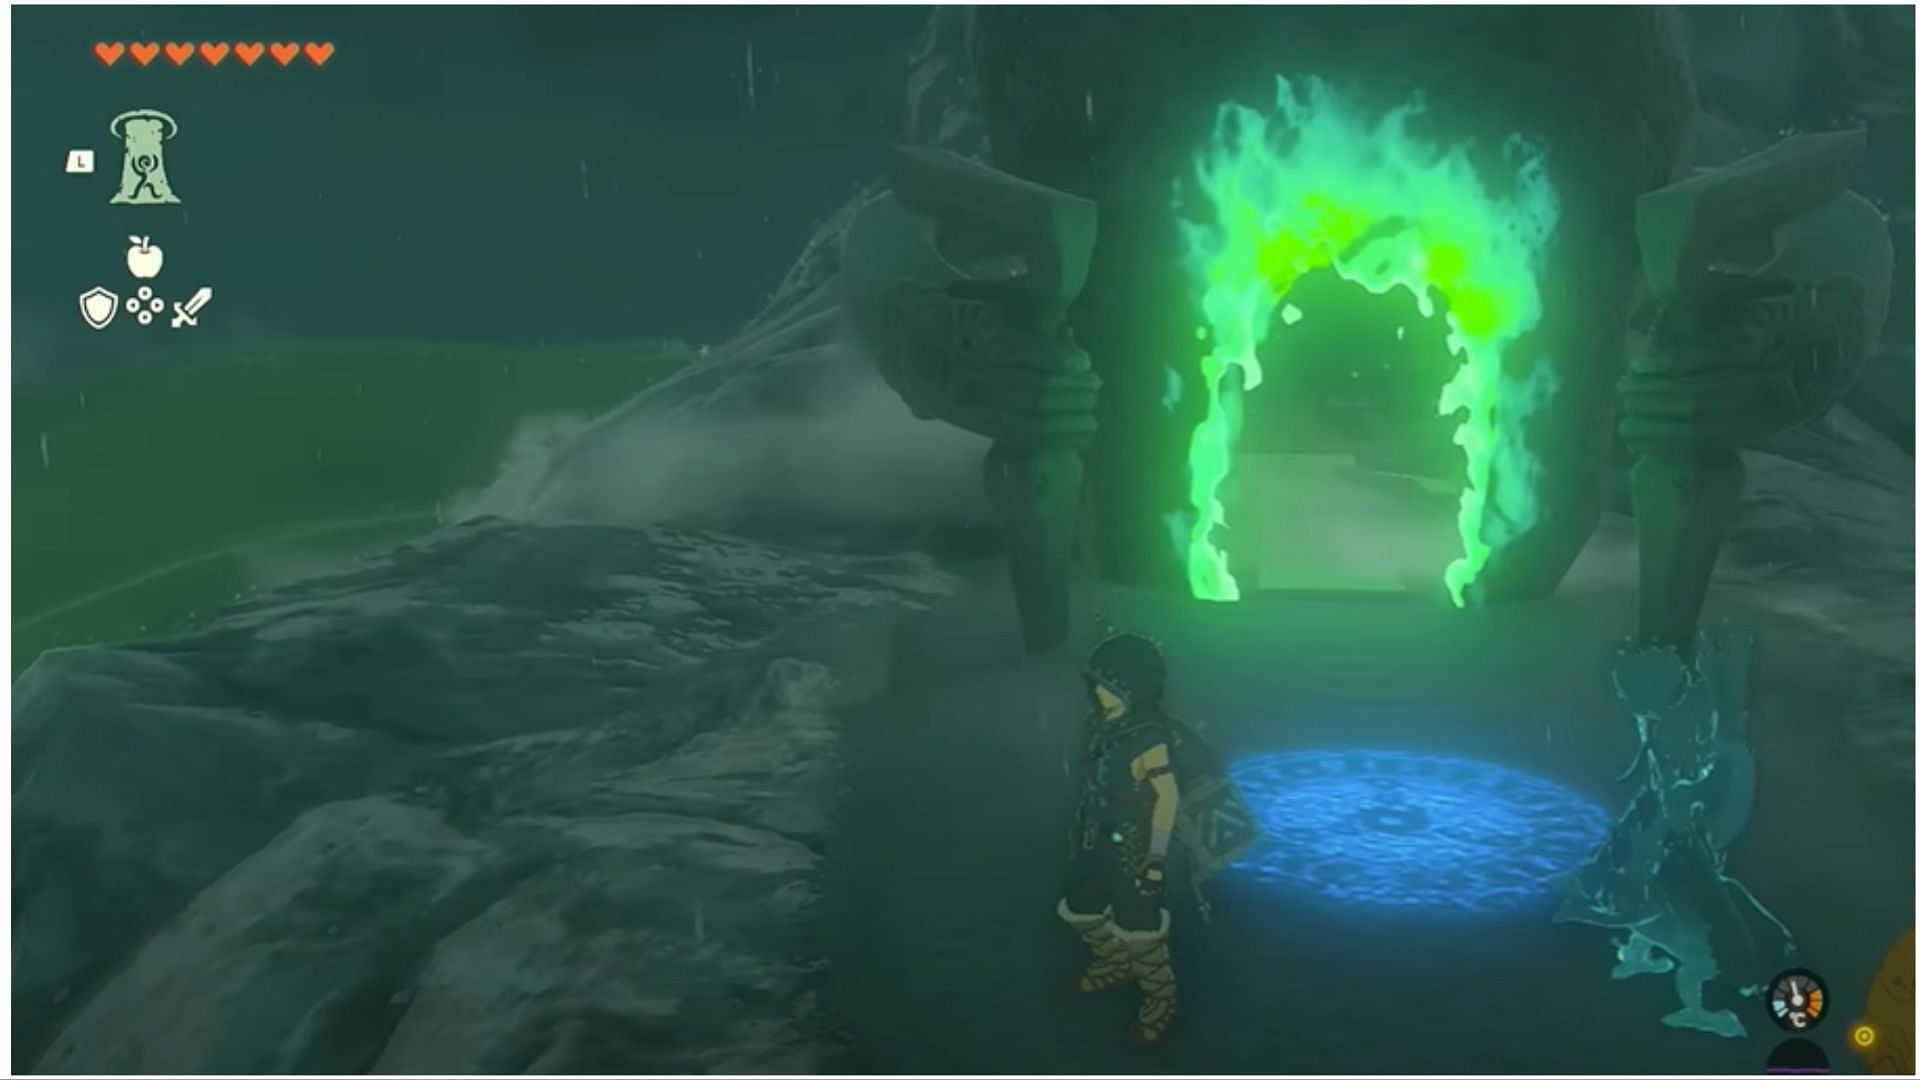 Players will need to utilize the Ultrahand ability skillfully within this Shrine (Image via YouTube/ WoW Quests)